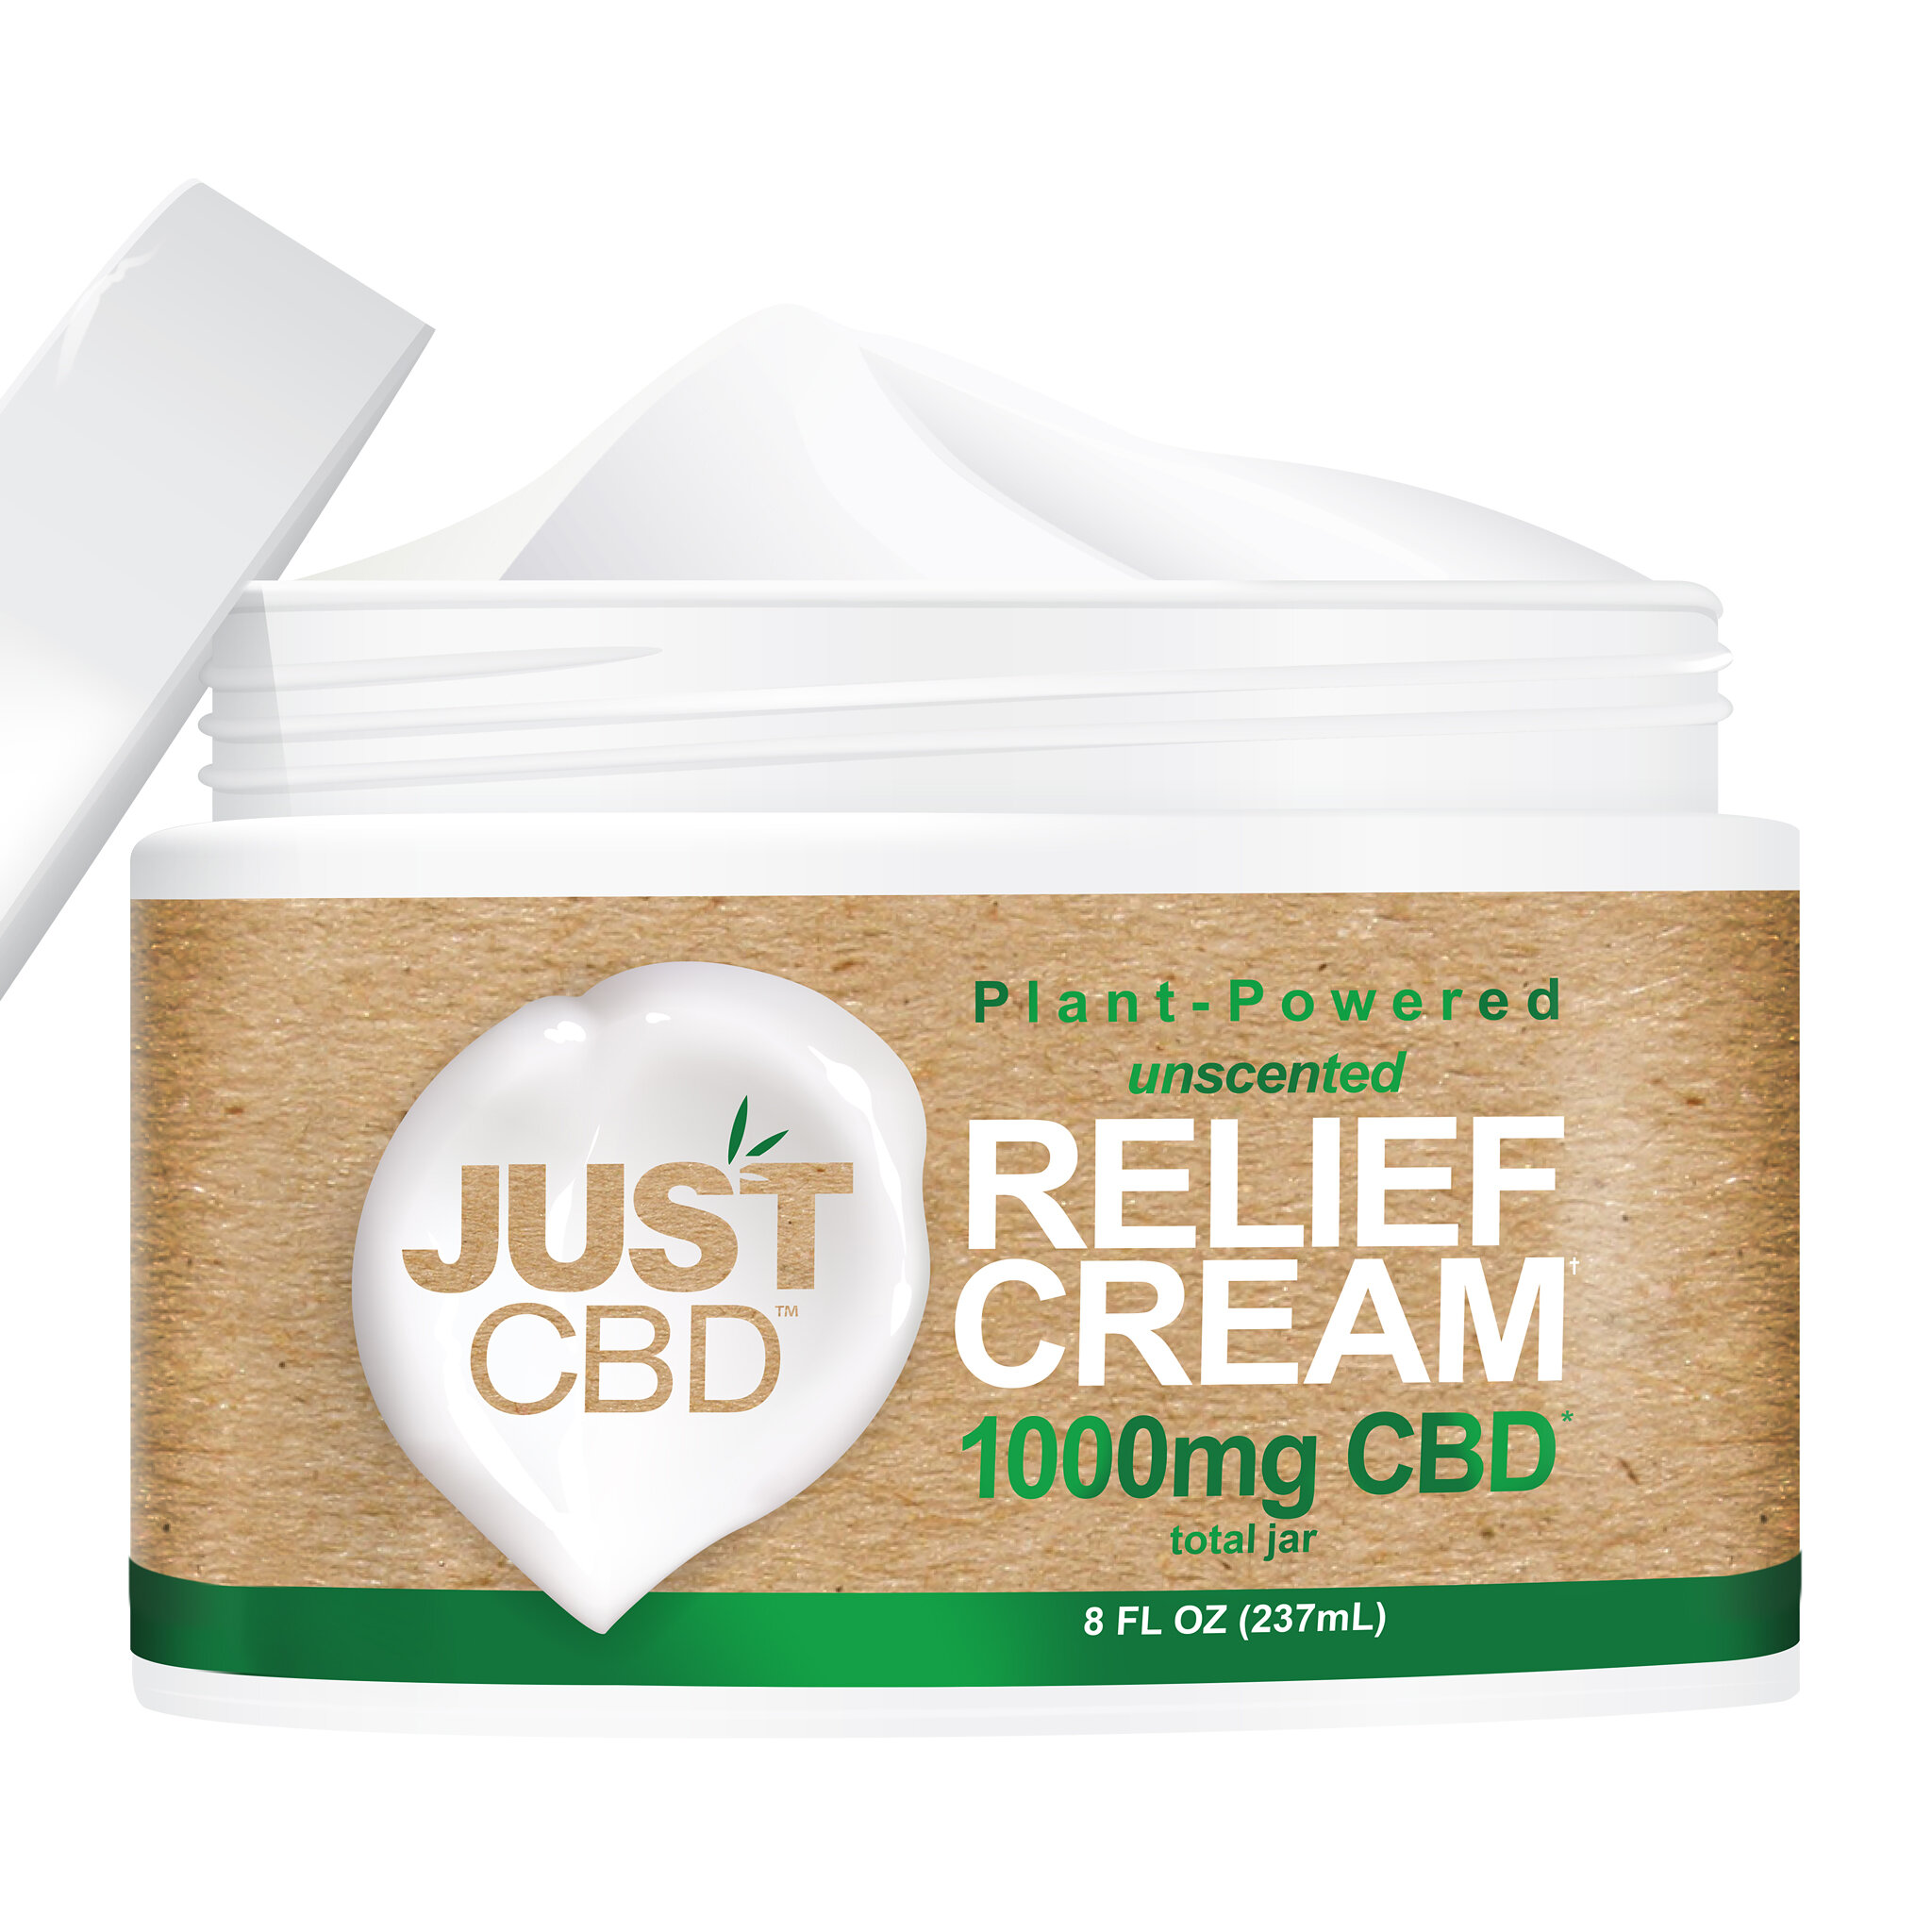 PAIN RELIEF PEN CREAM CBD BARNETT - Cbd|Pain|Cream|Products|Relief|Creams|Hemp|Product|Skin|Oil|Arthritis|Ingredients|Body|Topicals|Muscle|Effects|Inflammation|Brand|People|Spectrum|Health|Oils|Salve|Thc|Quality|Benefits|Menthol|Way|Joints|Aches|Research|Potency|Results|Creams|Plant|Cannabinoids|Brands|Naturals|Cons|Muscles|Cbd Cream|Cbd Creams|Pain Relief|Cbd Products|Cbd Topicals|Cbd Oil|Fab Cbd|Joint Pain|Full Spectrum Cbd|Cbd Pain Cream|Chronic Pain|United States|Cbd Oils|Topical Products|Rheumatoid Arthritis|Topical Cbd Cream|Endocannabinoid System|Pain Relief Cream|Green Roads|Pain Management|Full-Spectrum Cbd|Joy Organics|Cbd Pain Relief|Topical Cream|Topical Cbd Products|Essential Oils|Cheef Botanicals|Cbd Isolate|Side Effects|Cbd Costs